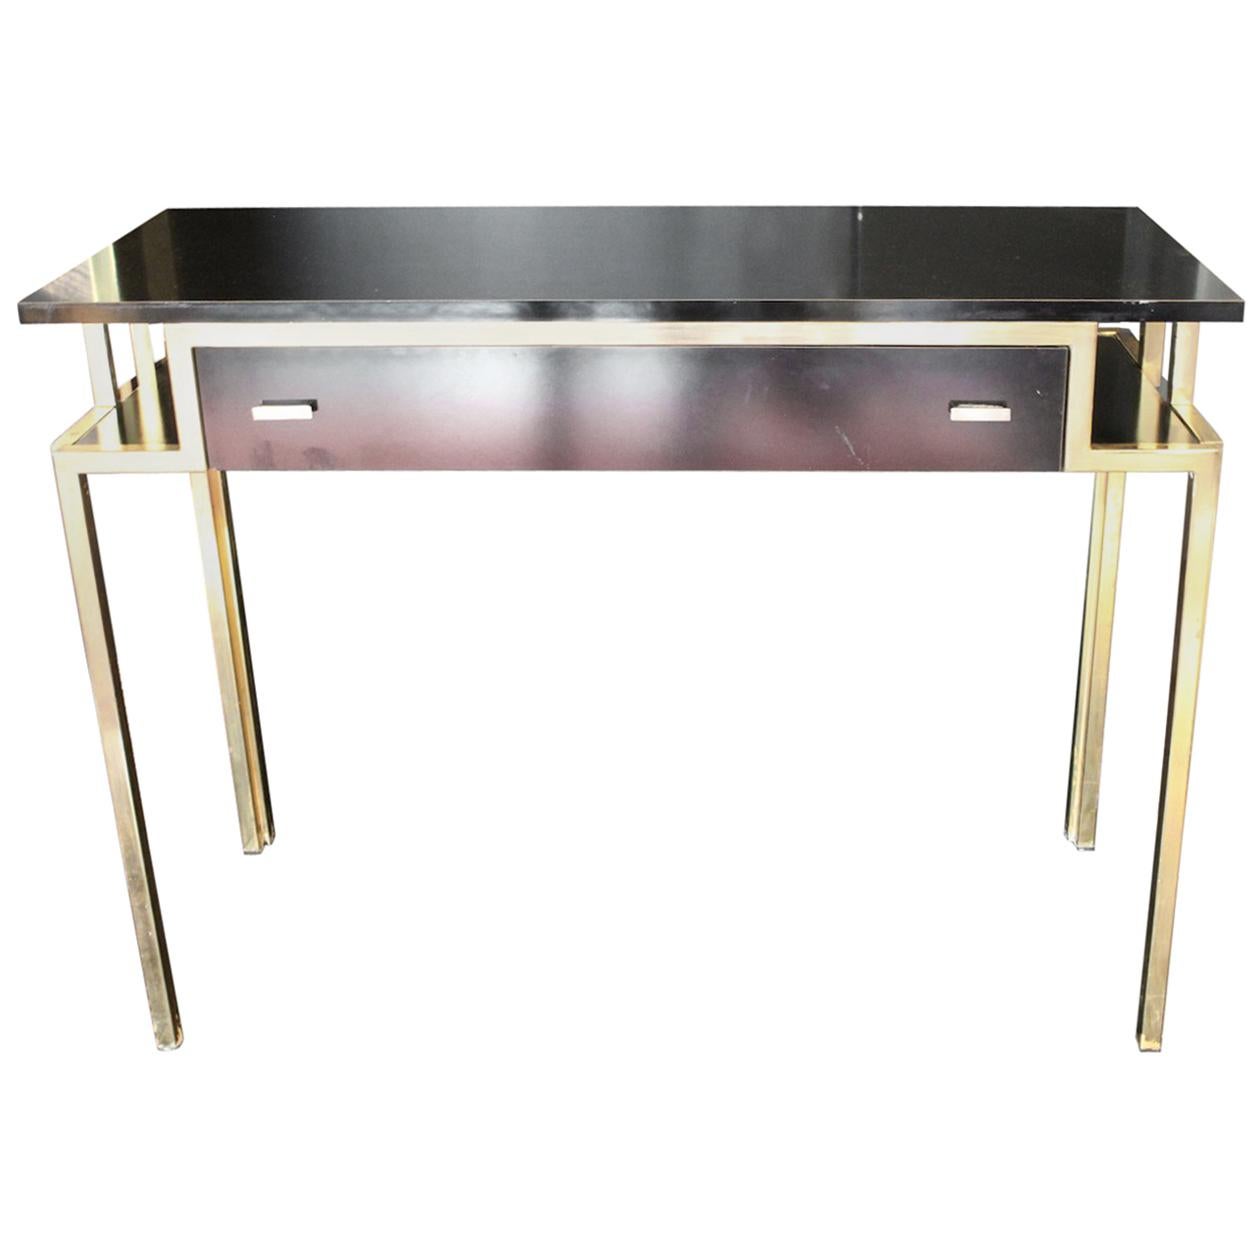 1970 Rectangular Writing Desk / Console in Laminate and Brass Finishes